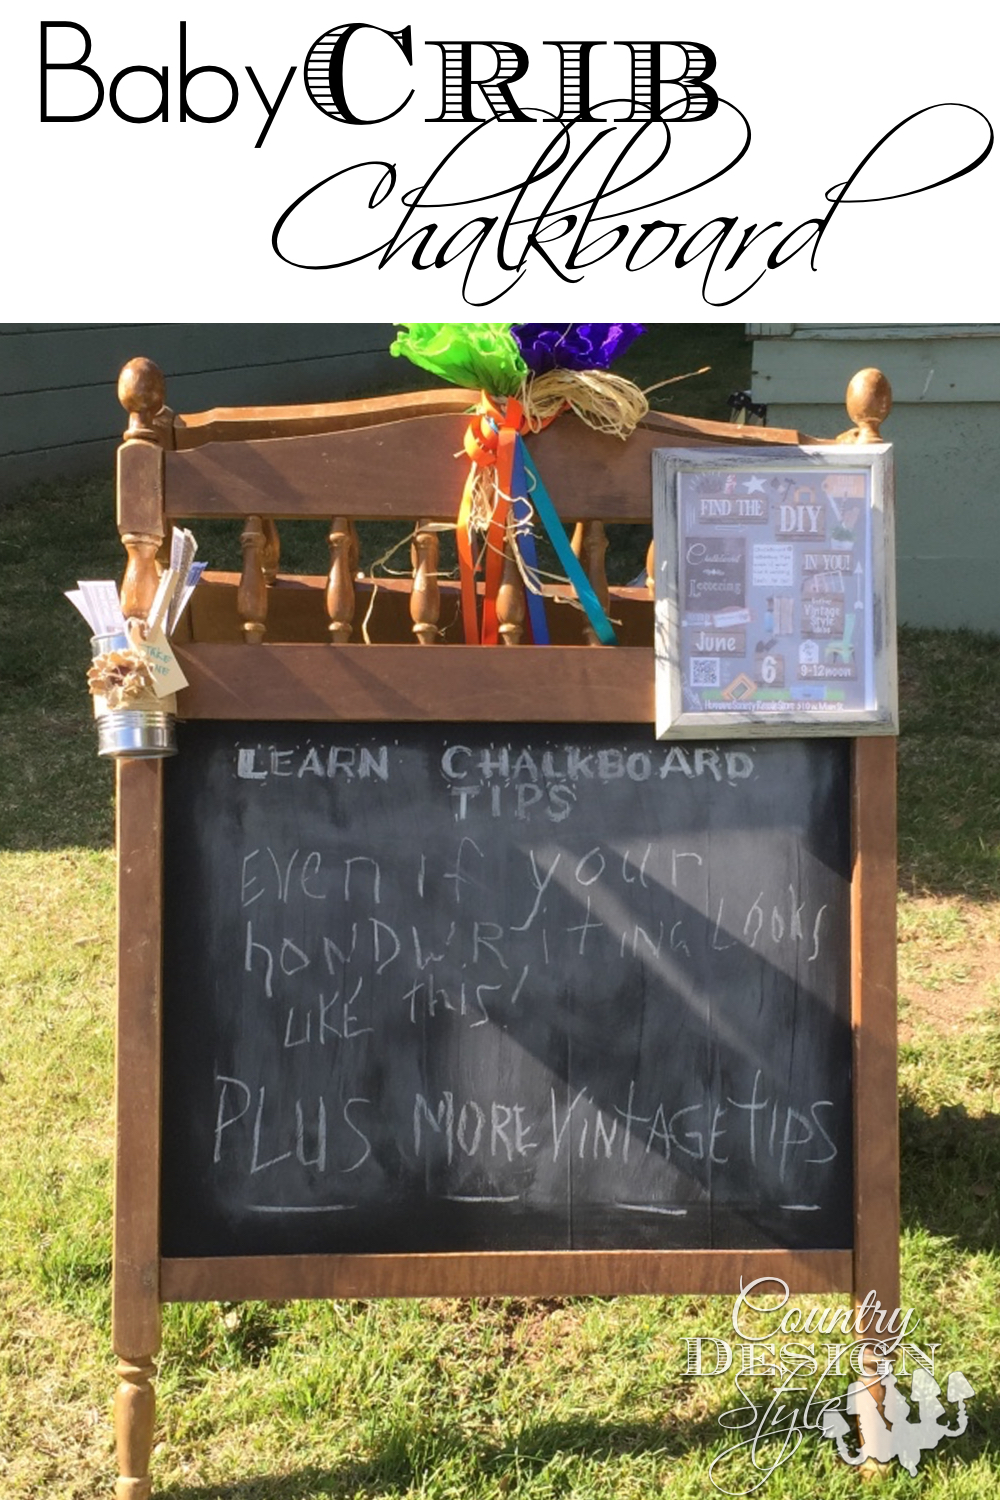 Easy to make a chalkboard easel from baby crib headboard and footboard. Country Design Style